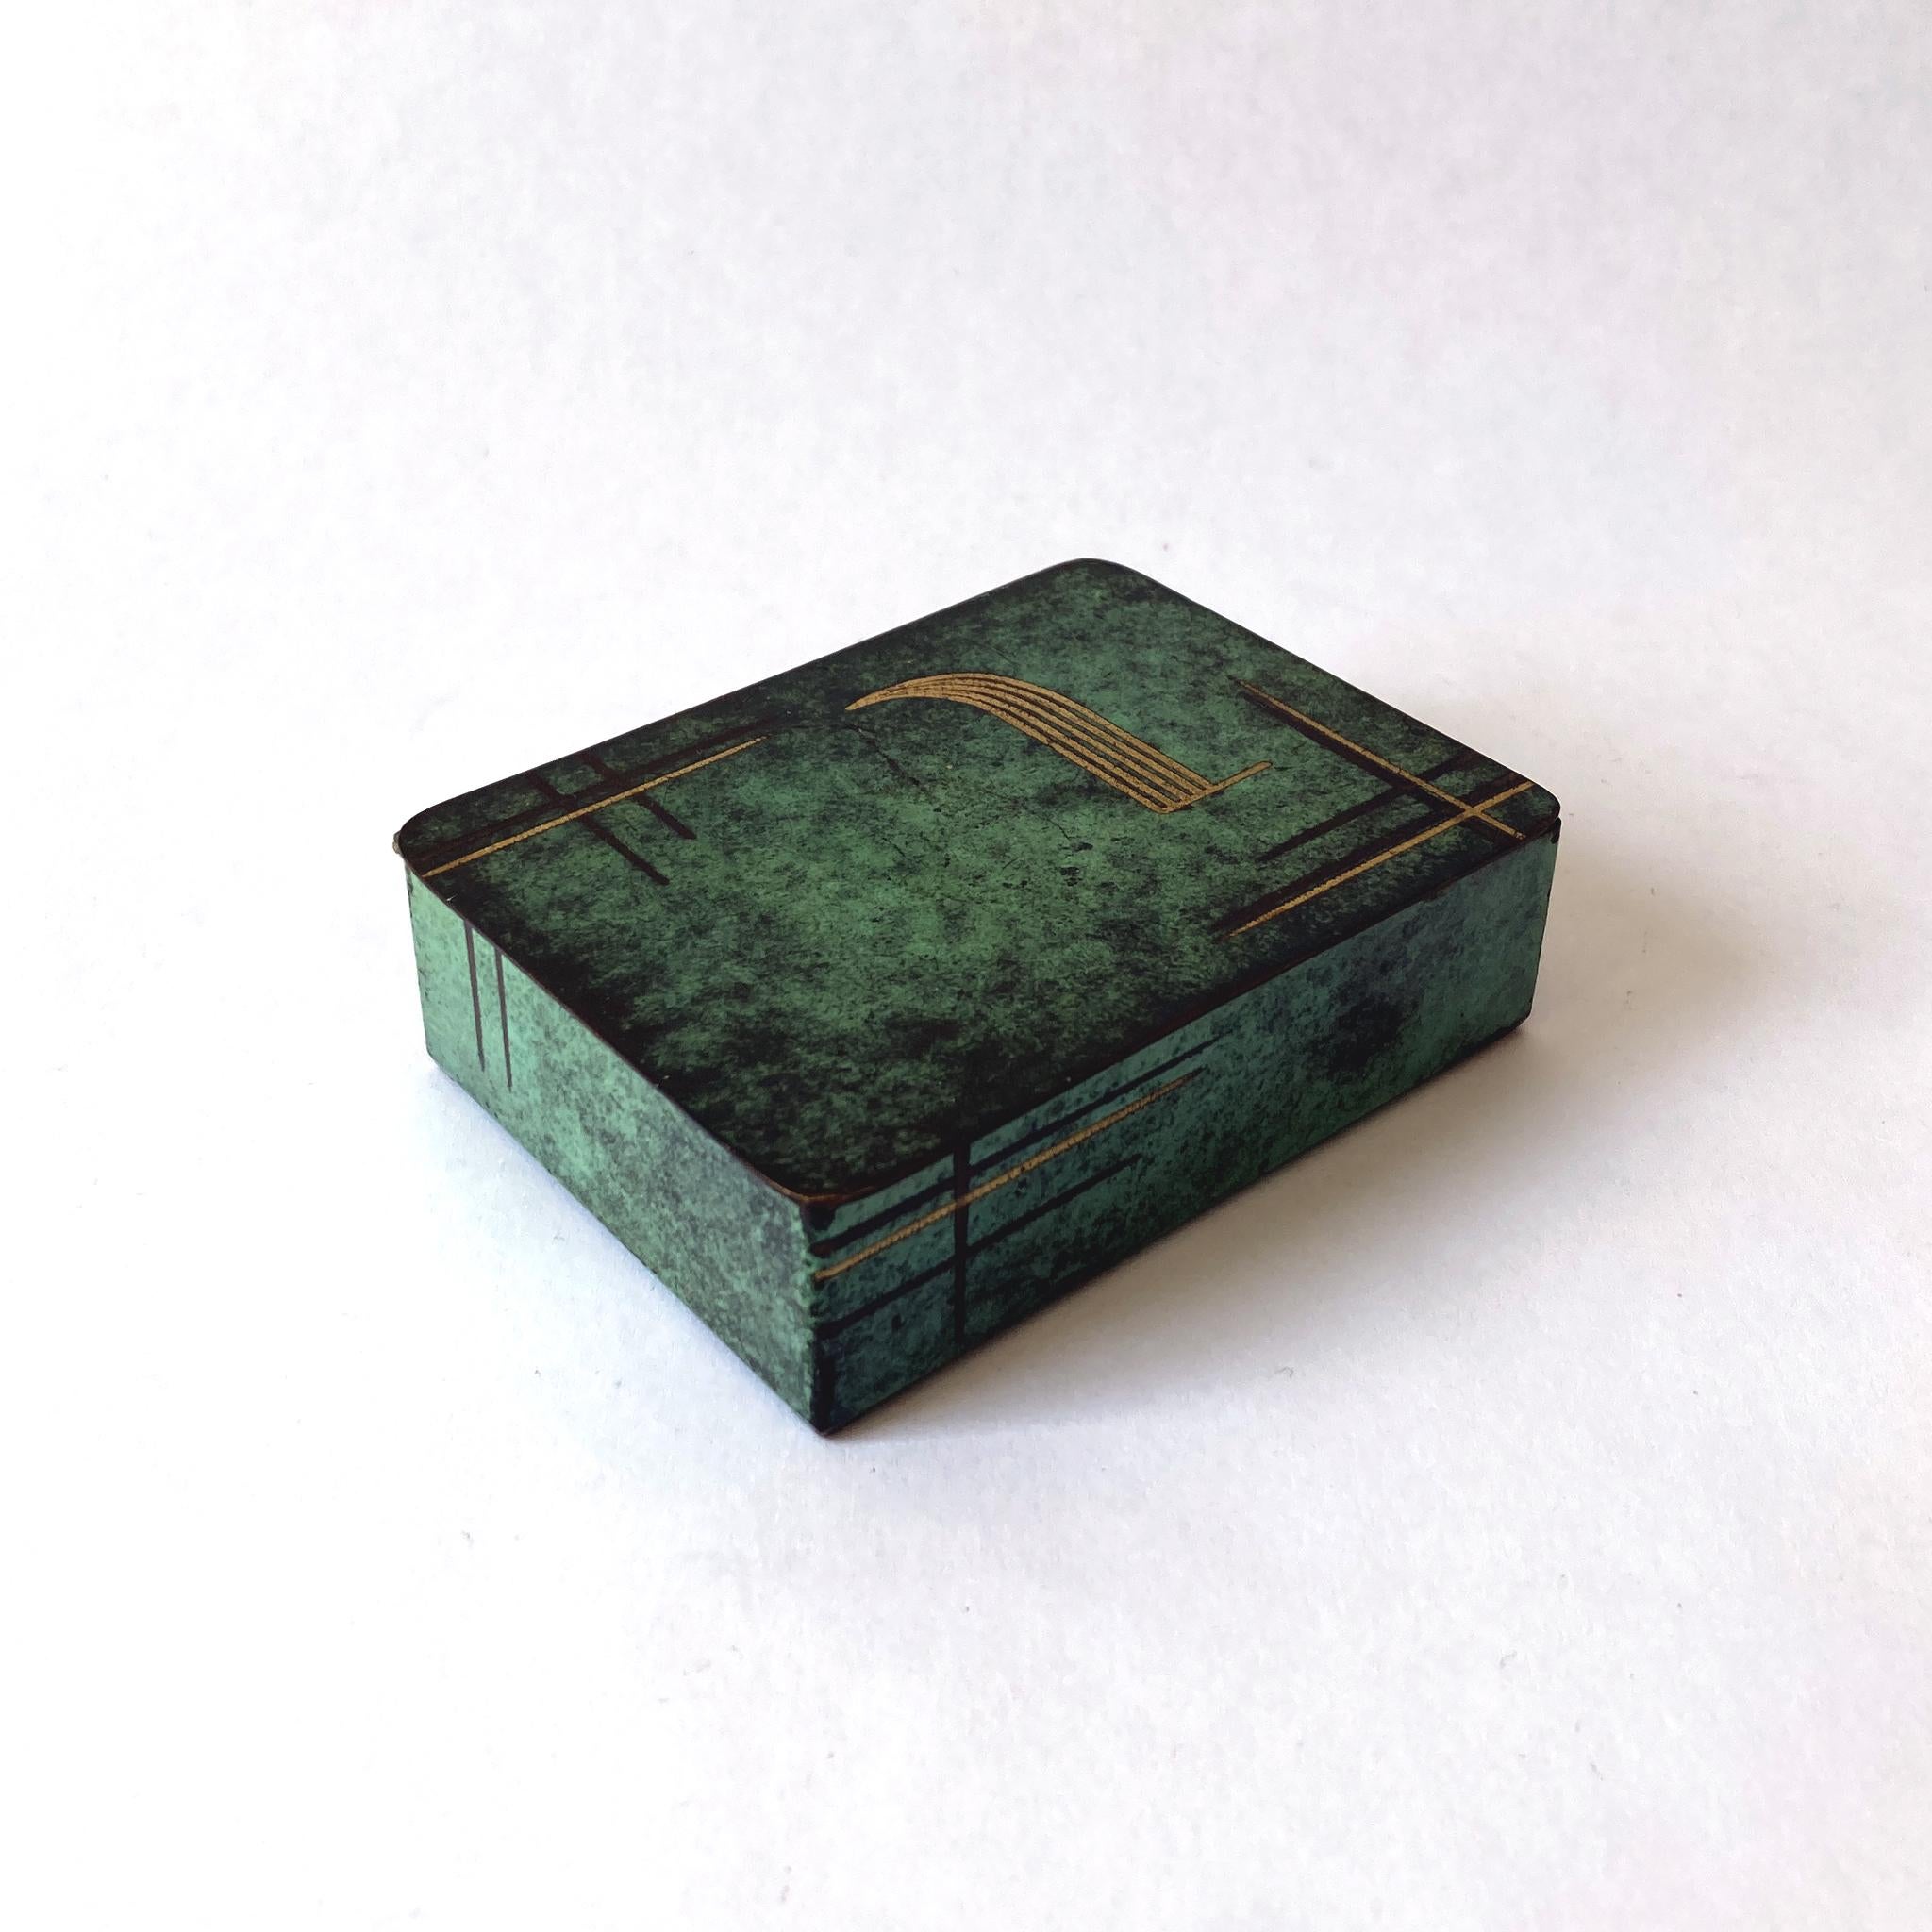 Rare Paul Haustein, WMF Ikora metal hinged box, wood-lined. The patinated green metal contrasts beautifully with the etched gold and dark brown pattern seen on the lid and sides. This piece looks wonderful as part of a group, or independently on a